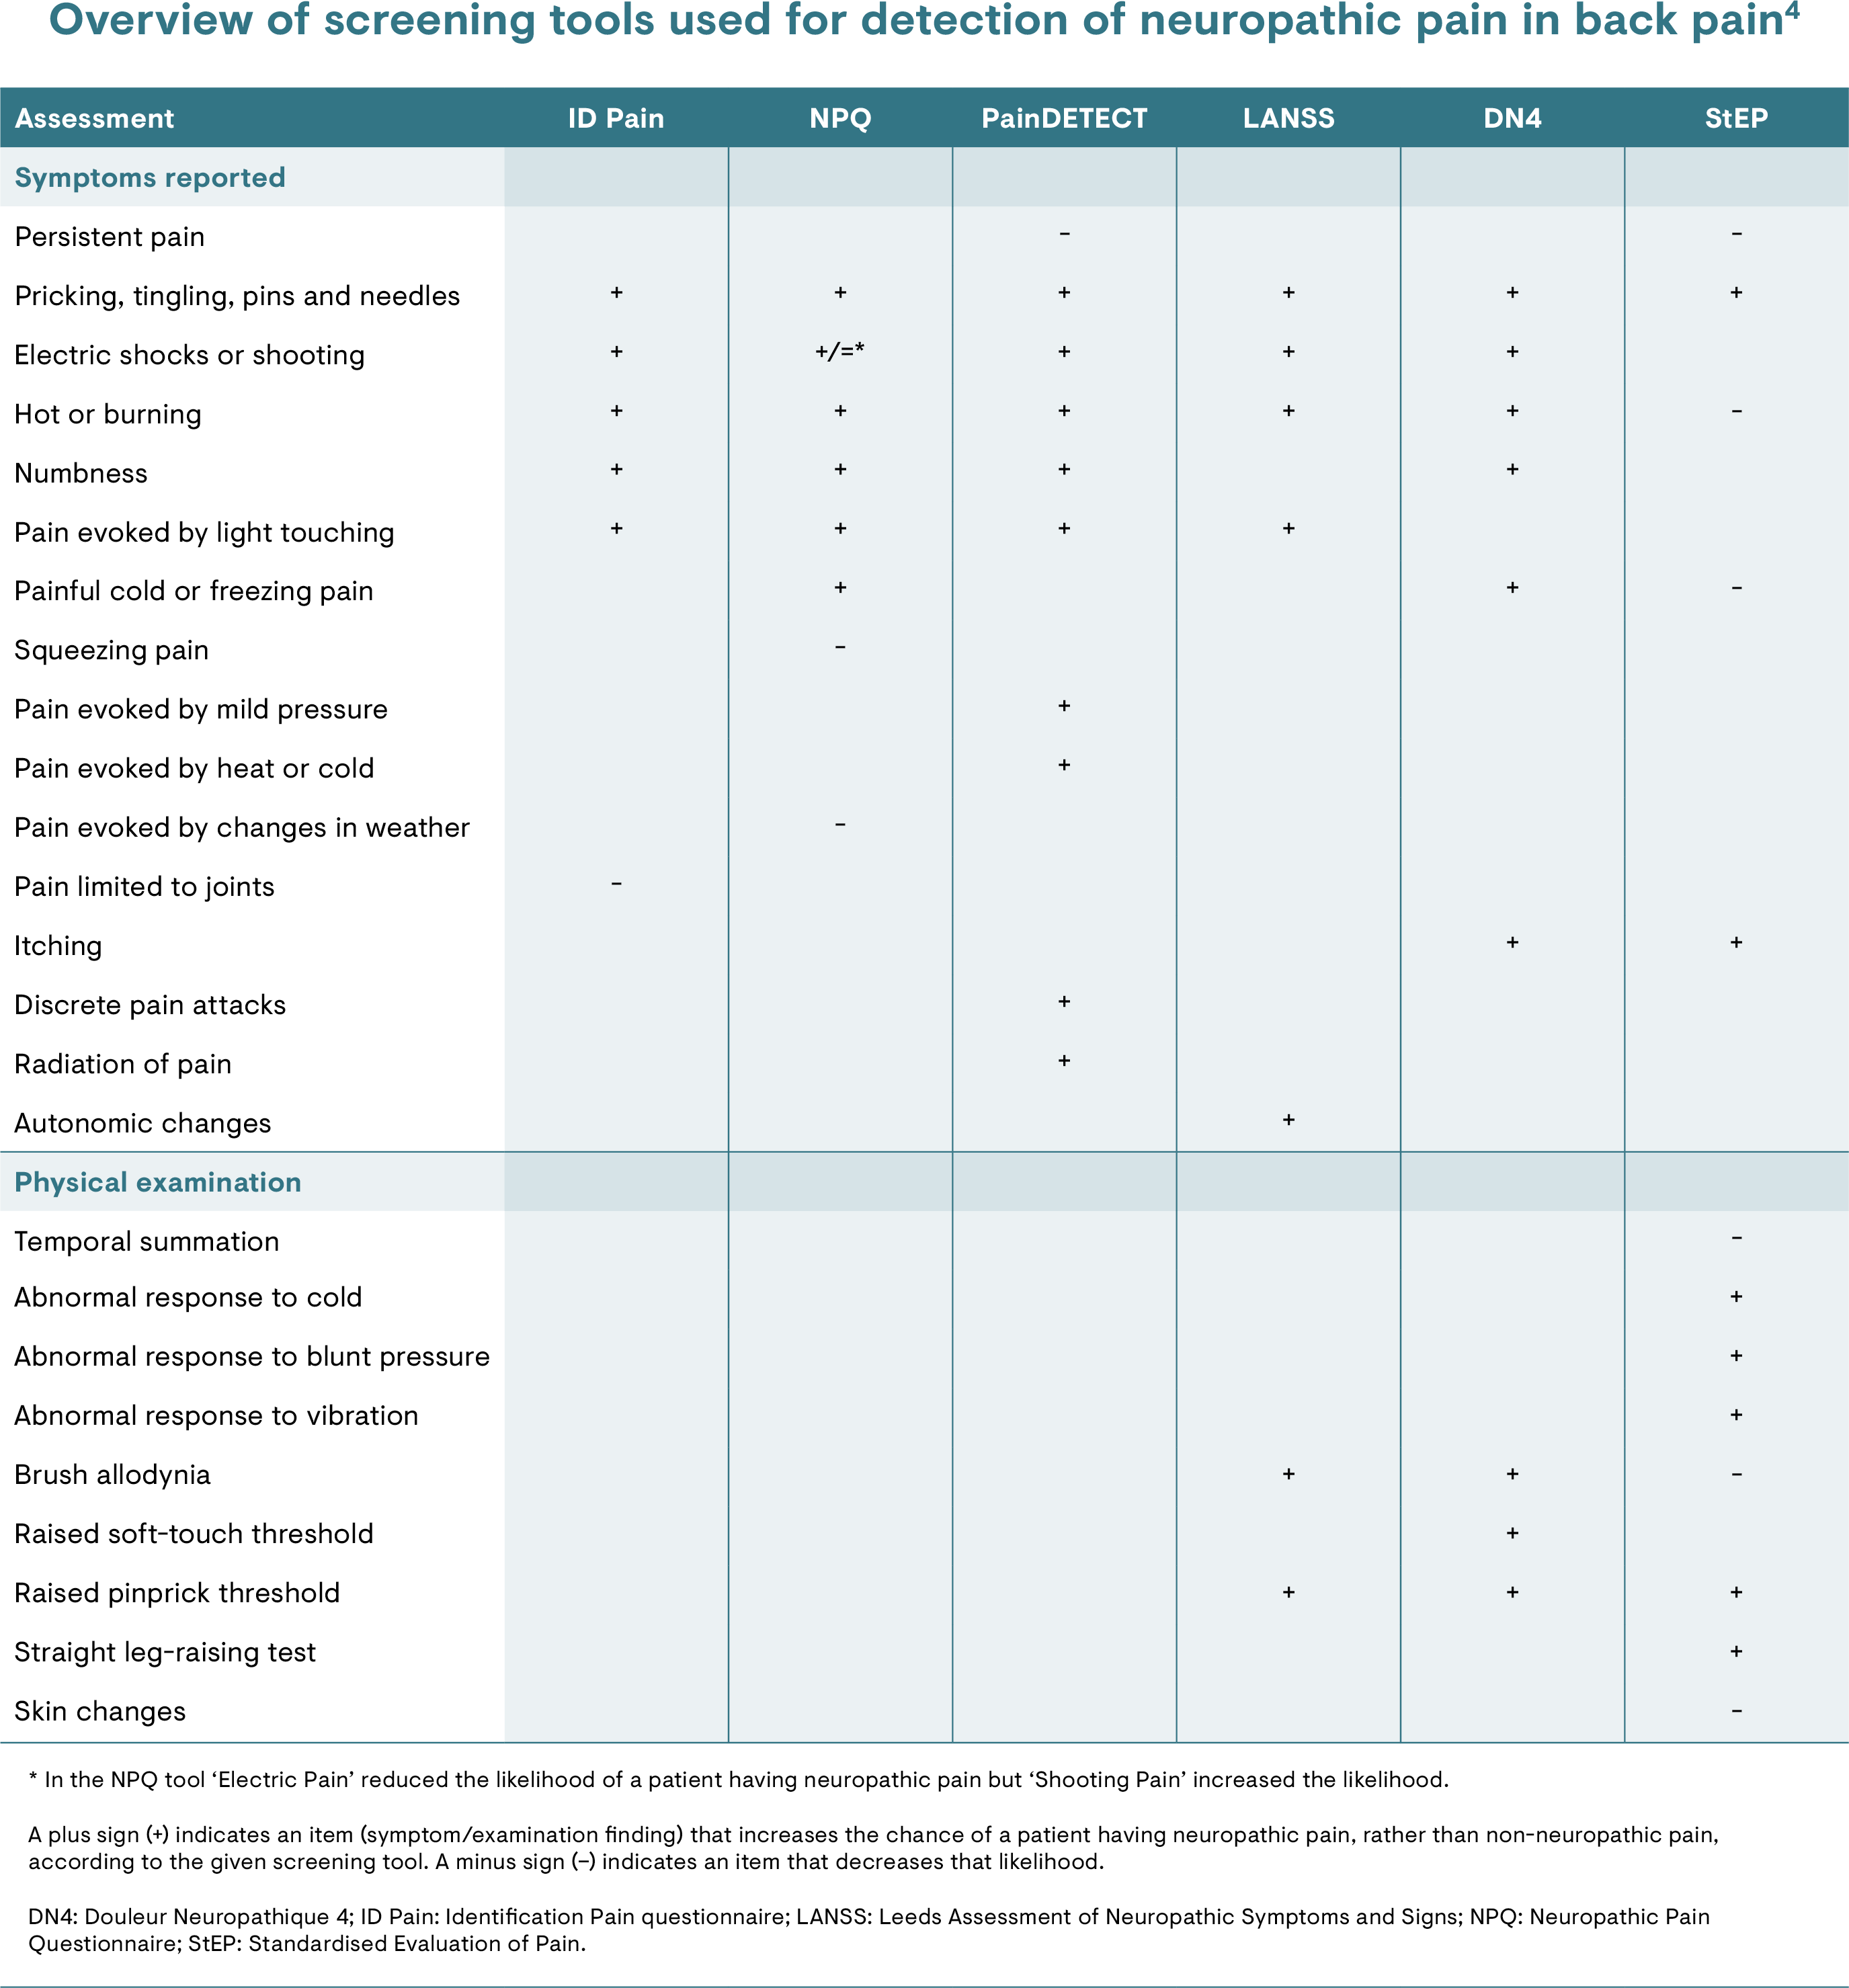 Table showing screening tools for the detection of neuropathic back pain (NBP)